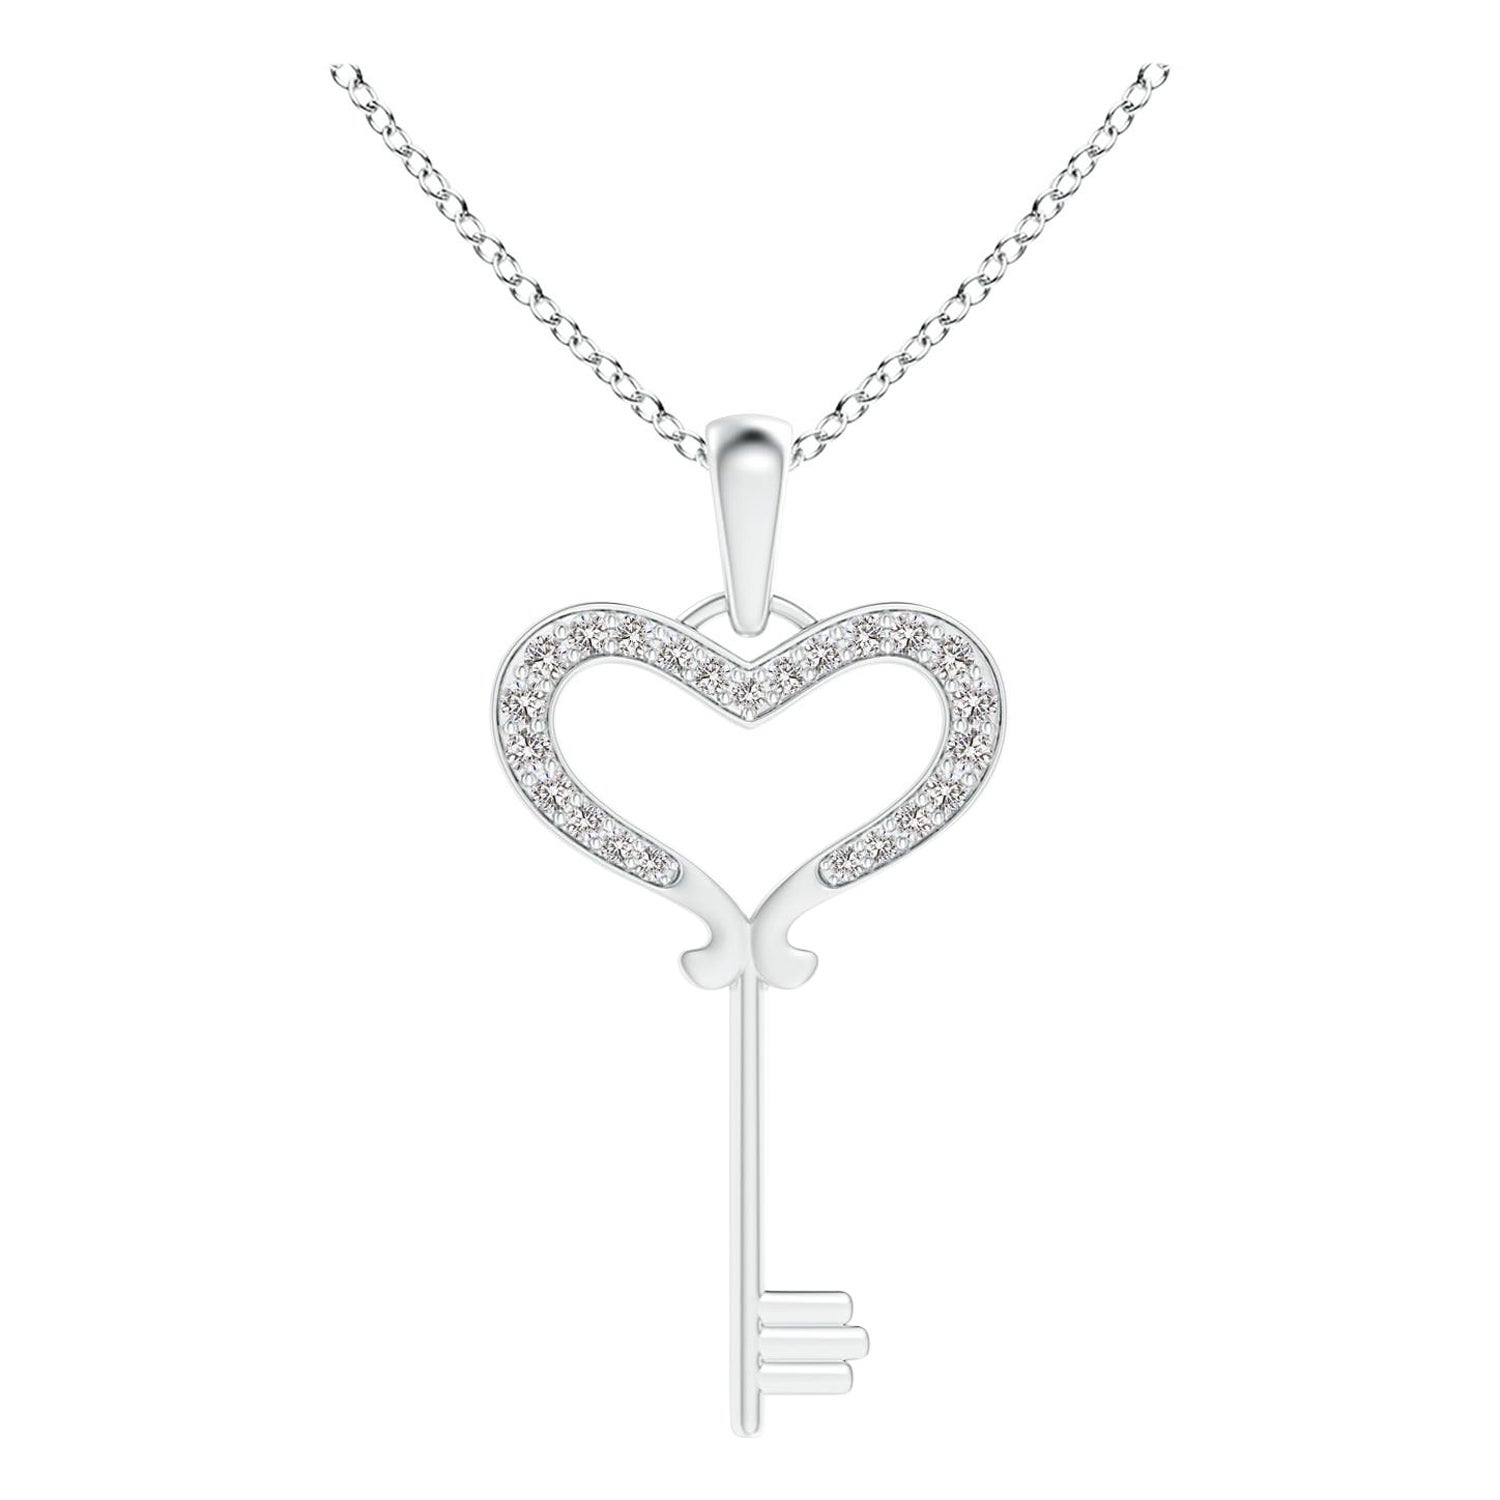 ANGARA Natural Pave-Set 0.13cttw Diamond Heart Key Pendant in 14K White Gold For Sale